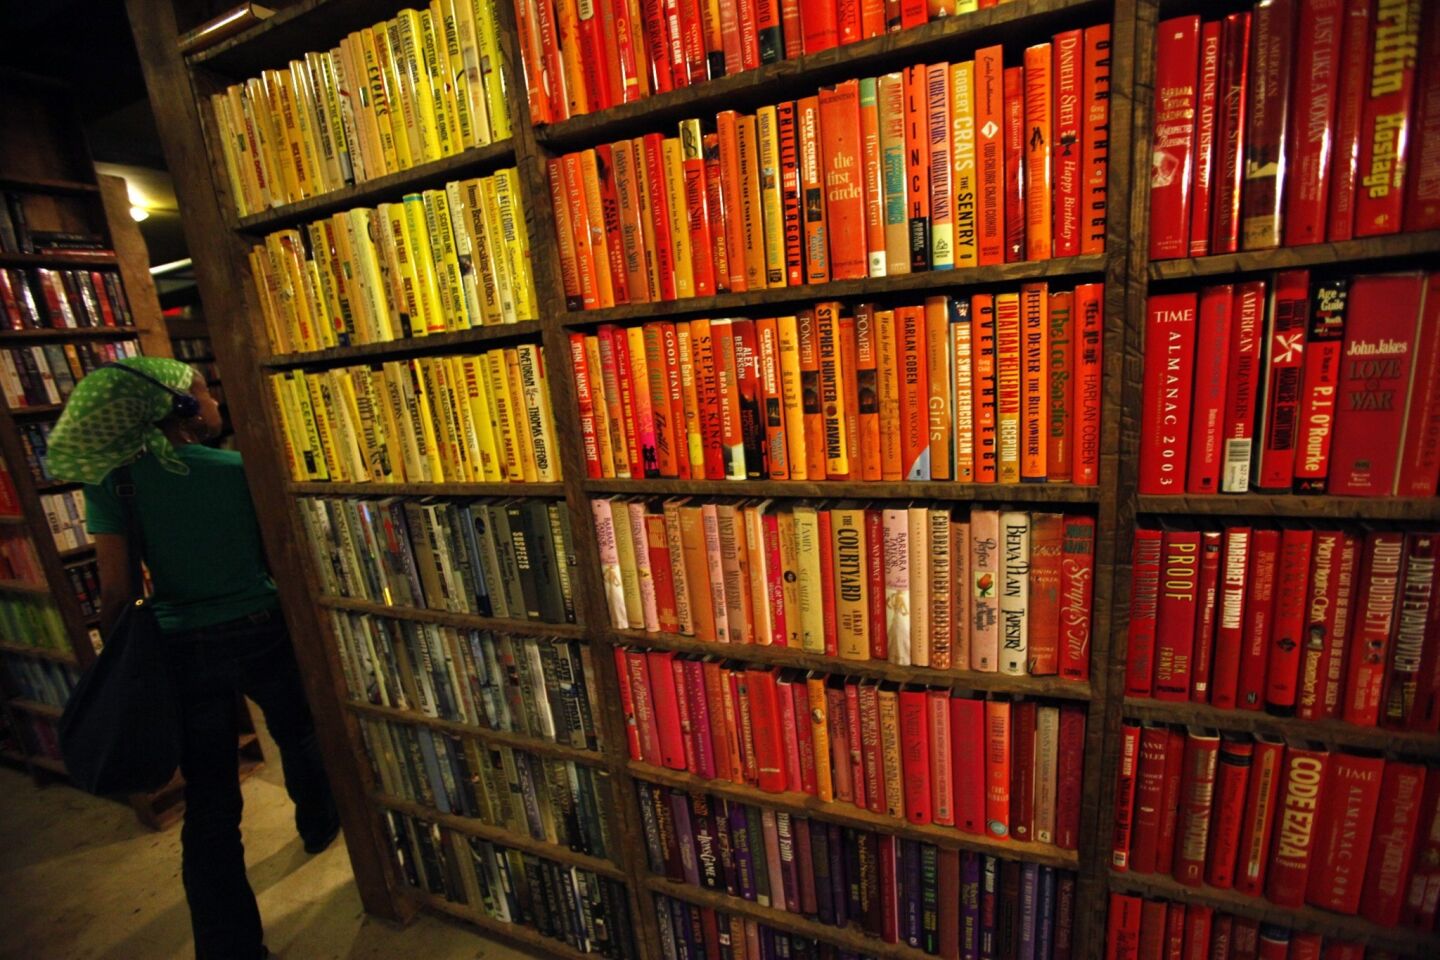 A visitor walks past the "color installation." Brady Westwater, a volunteer at the Last Bookstore, created the installation by placing books containing red, yellow and green book jacket covers together.